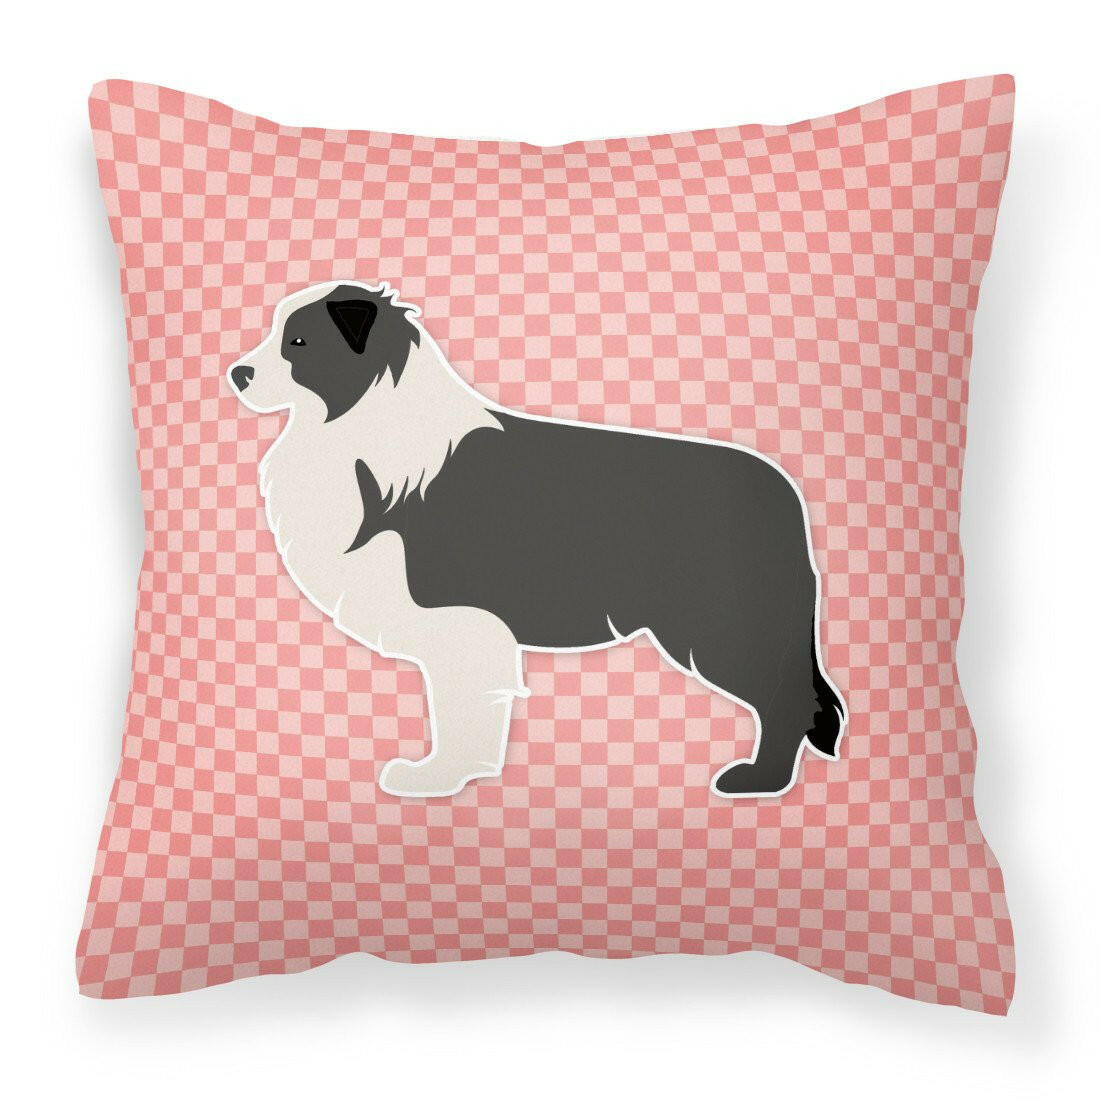 Black Border Collie Checkerboard Pink Fabric Decorative Pillow BB3623PW1818 by Caroline's Treasures